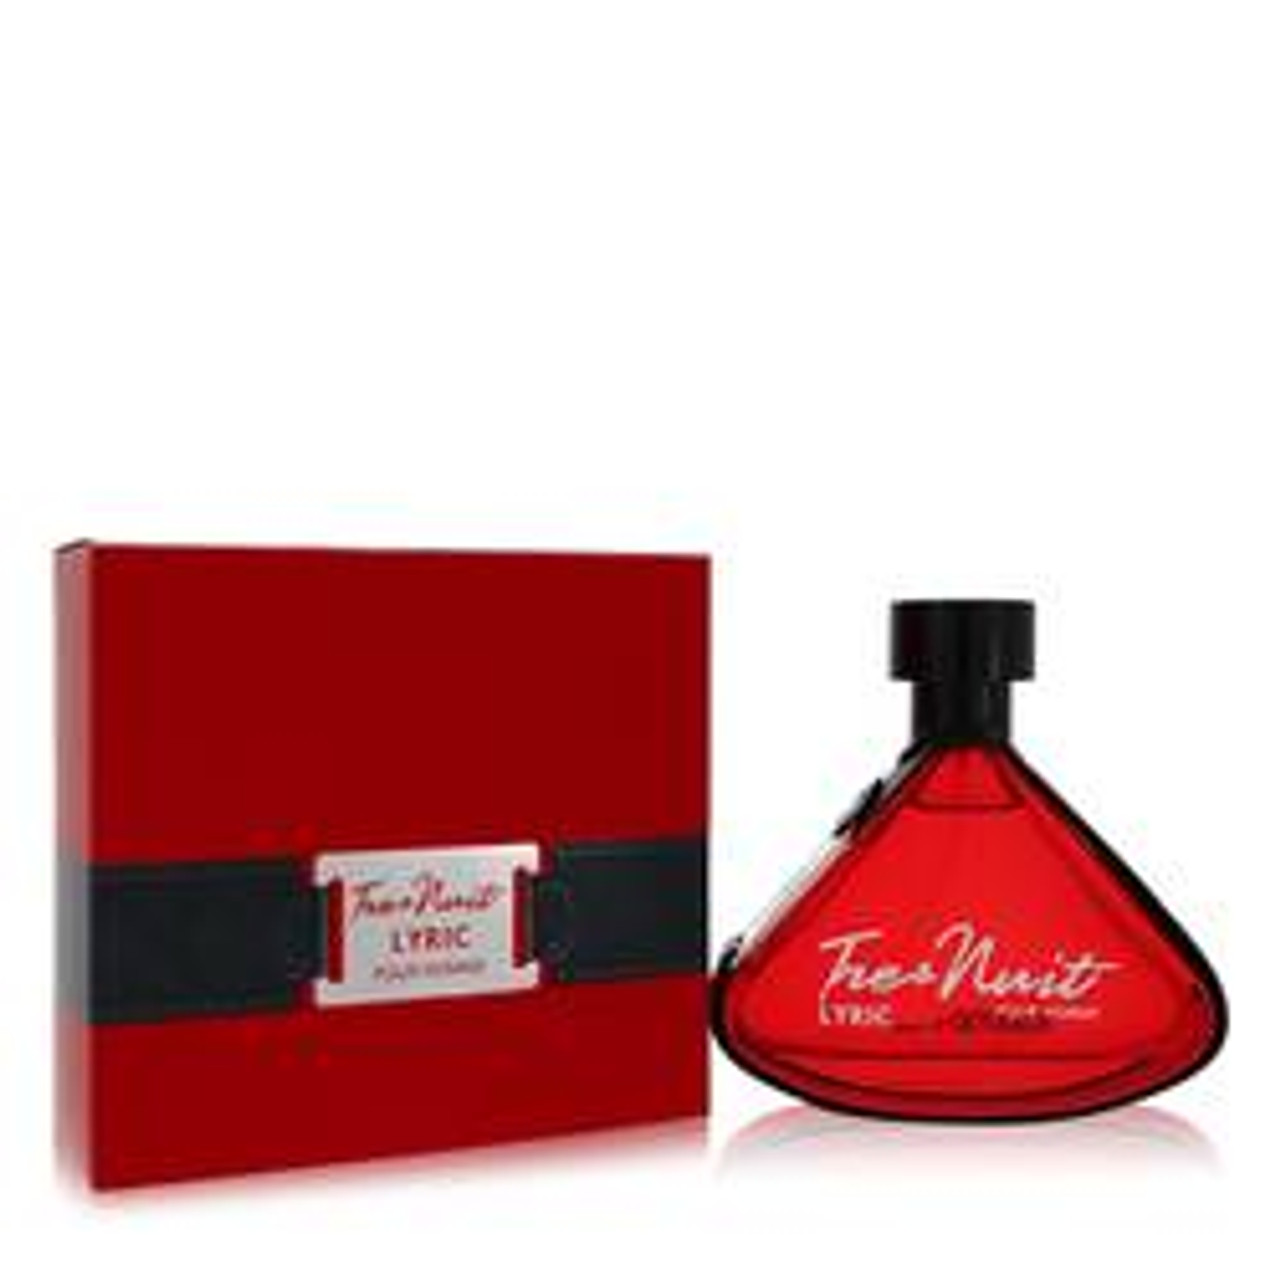 Armaf Tres Nuit Lyric Cologne By Armaf Eau De Parfum Spray 3.4 oz for Men - [From 96.00 - Choose pk Qty ] - *Ships from Miami